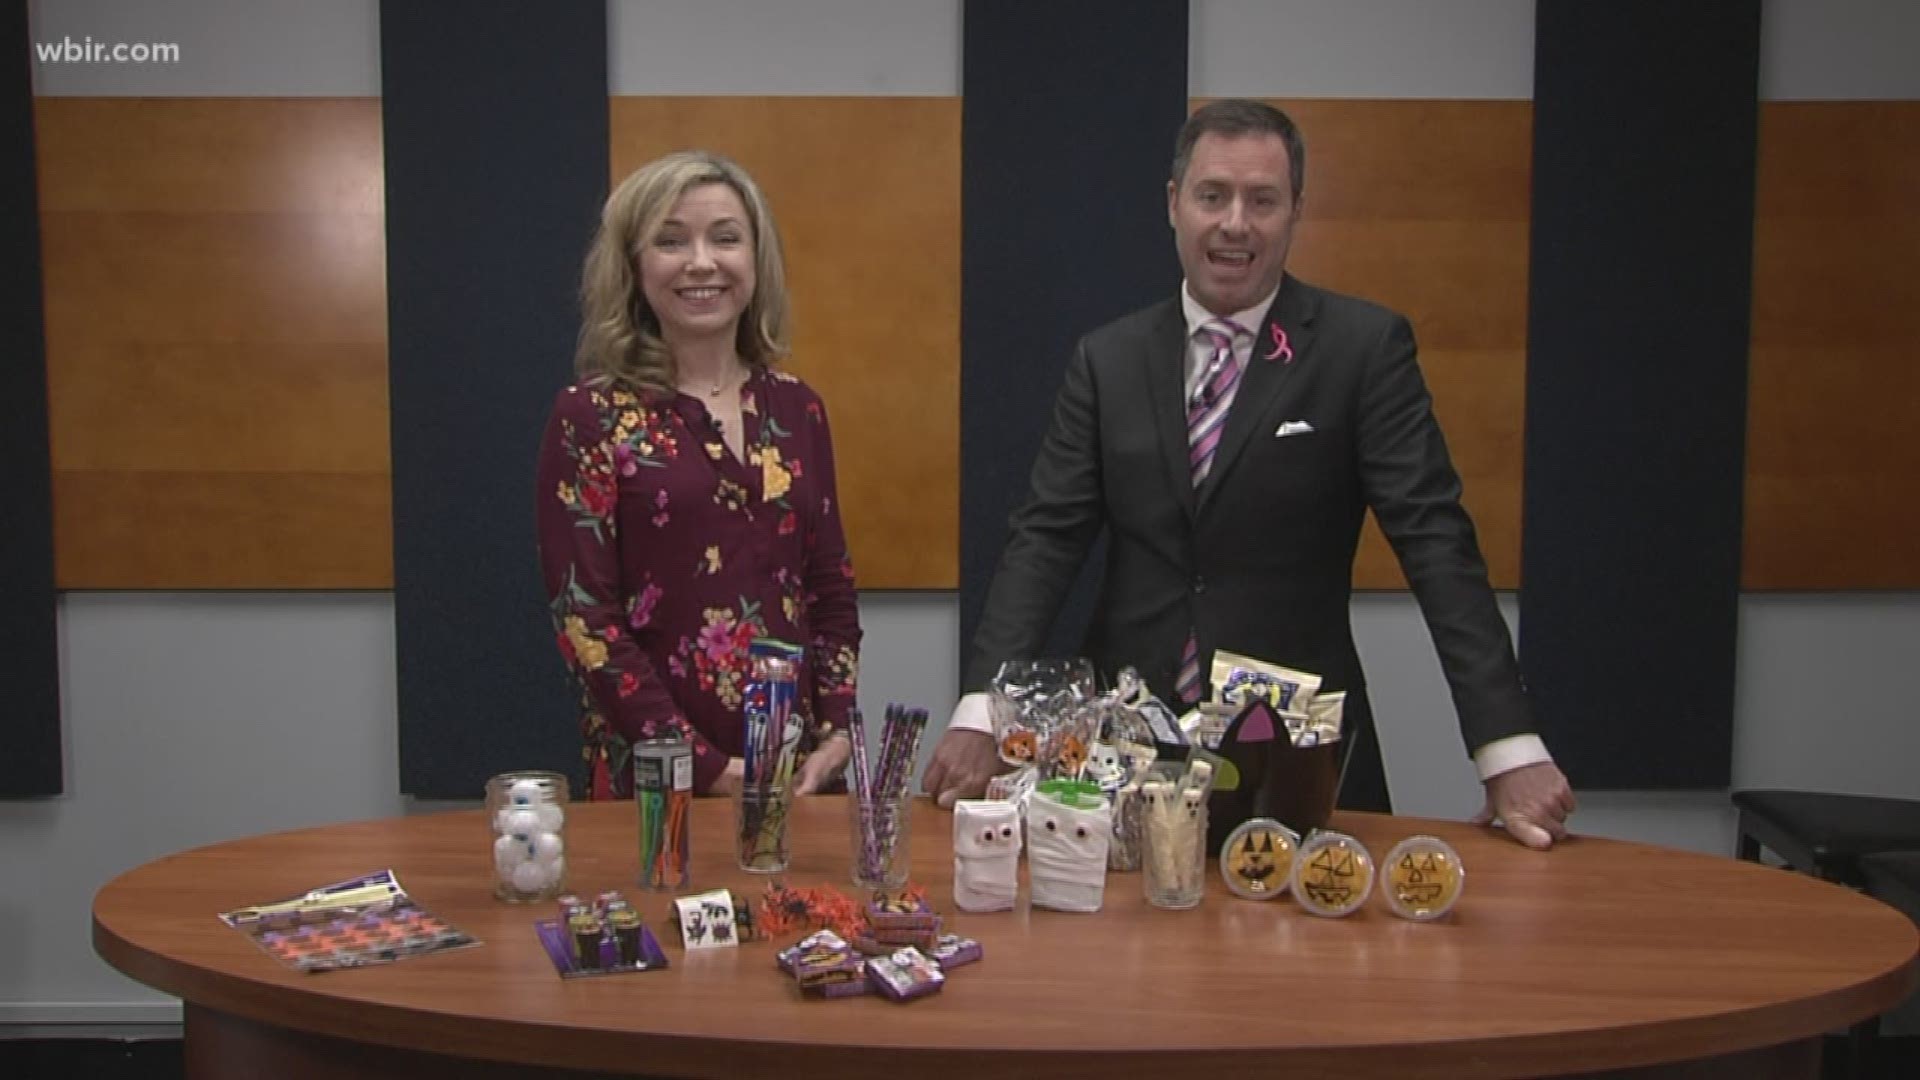 A registered dietitian shares alternatives to candy this Halloween